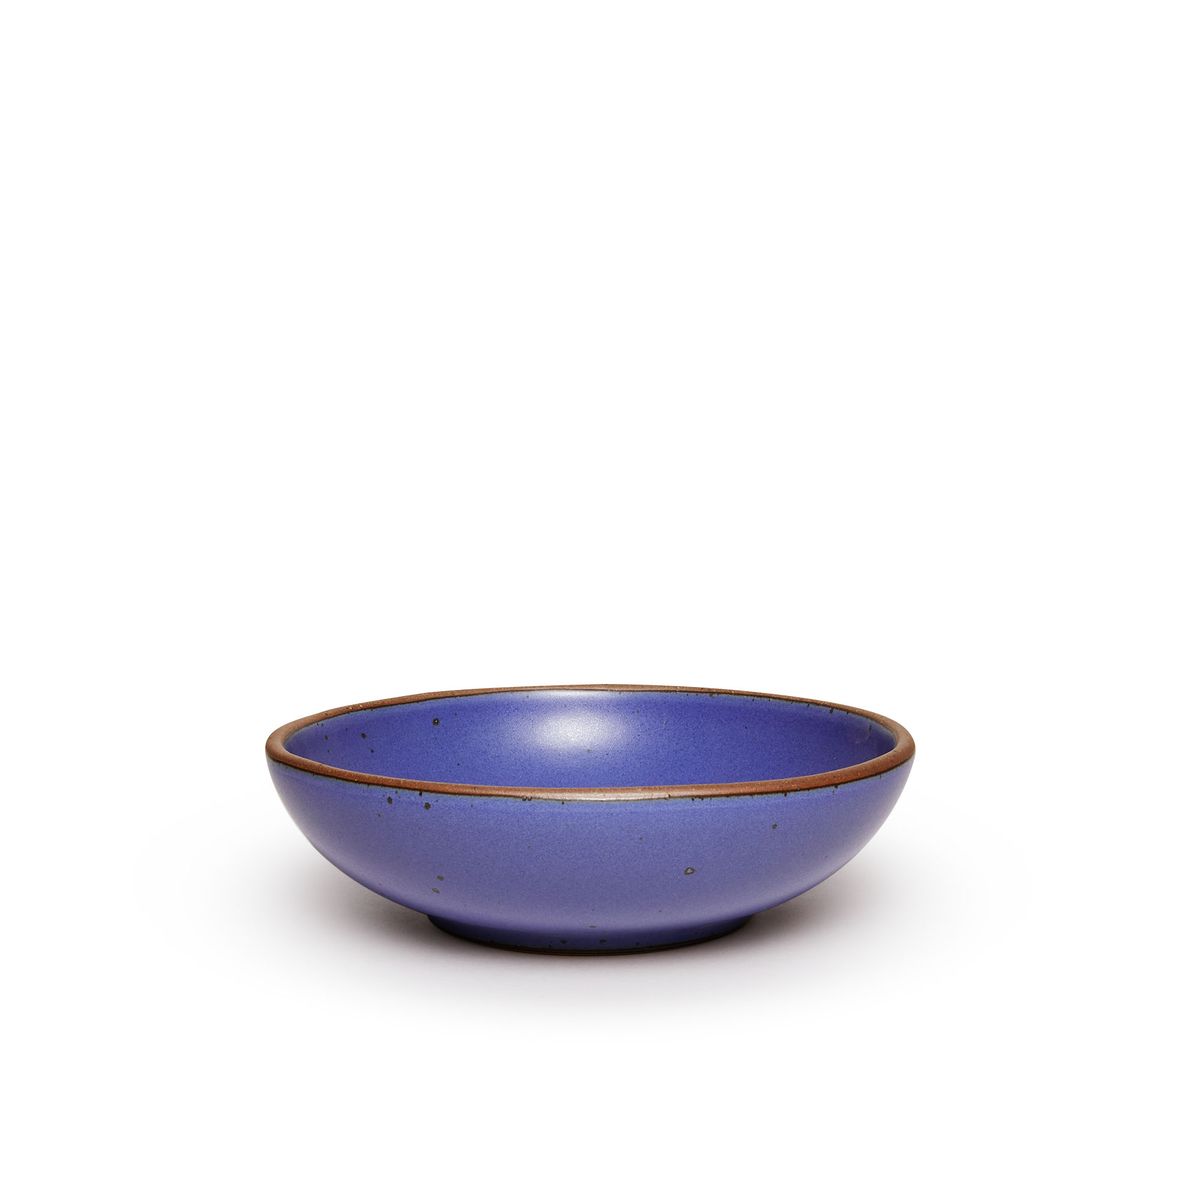 A dinner-sized shallow ceramic bowl in a true cool blue color featuring iron speckles and an unglazed rim